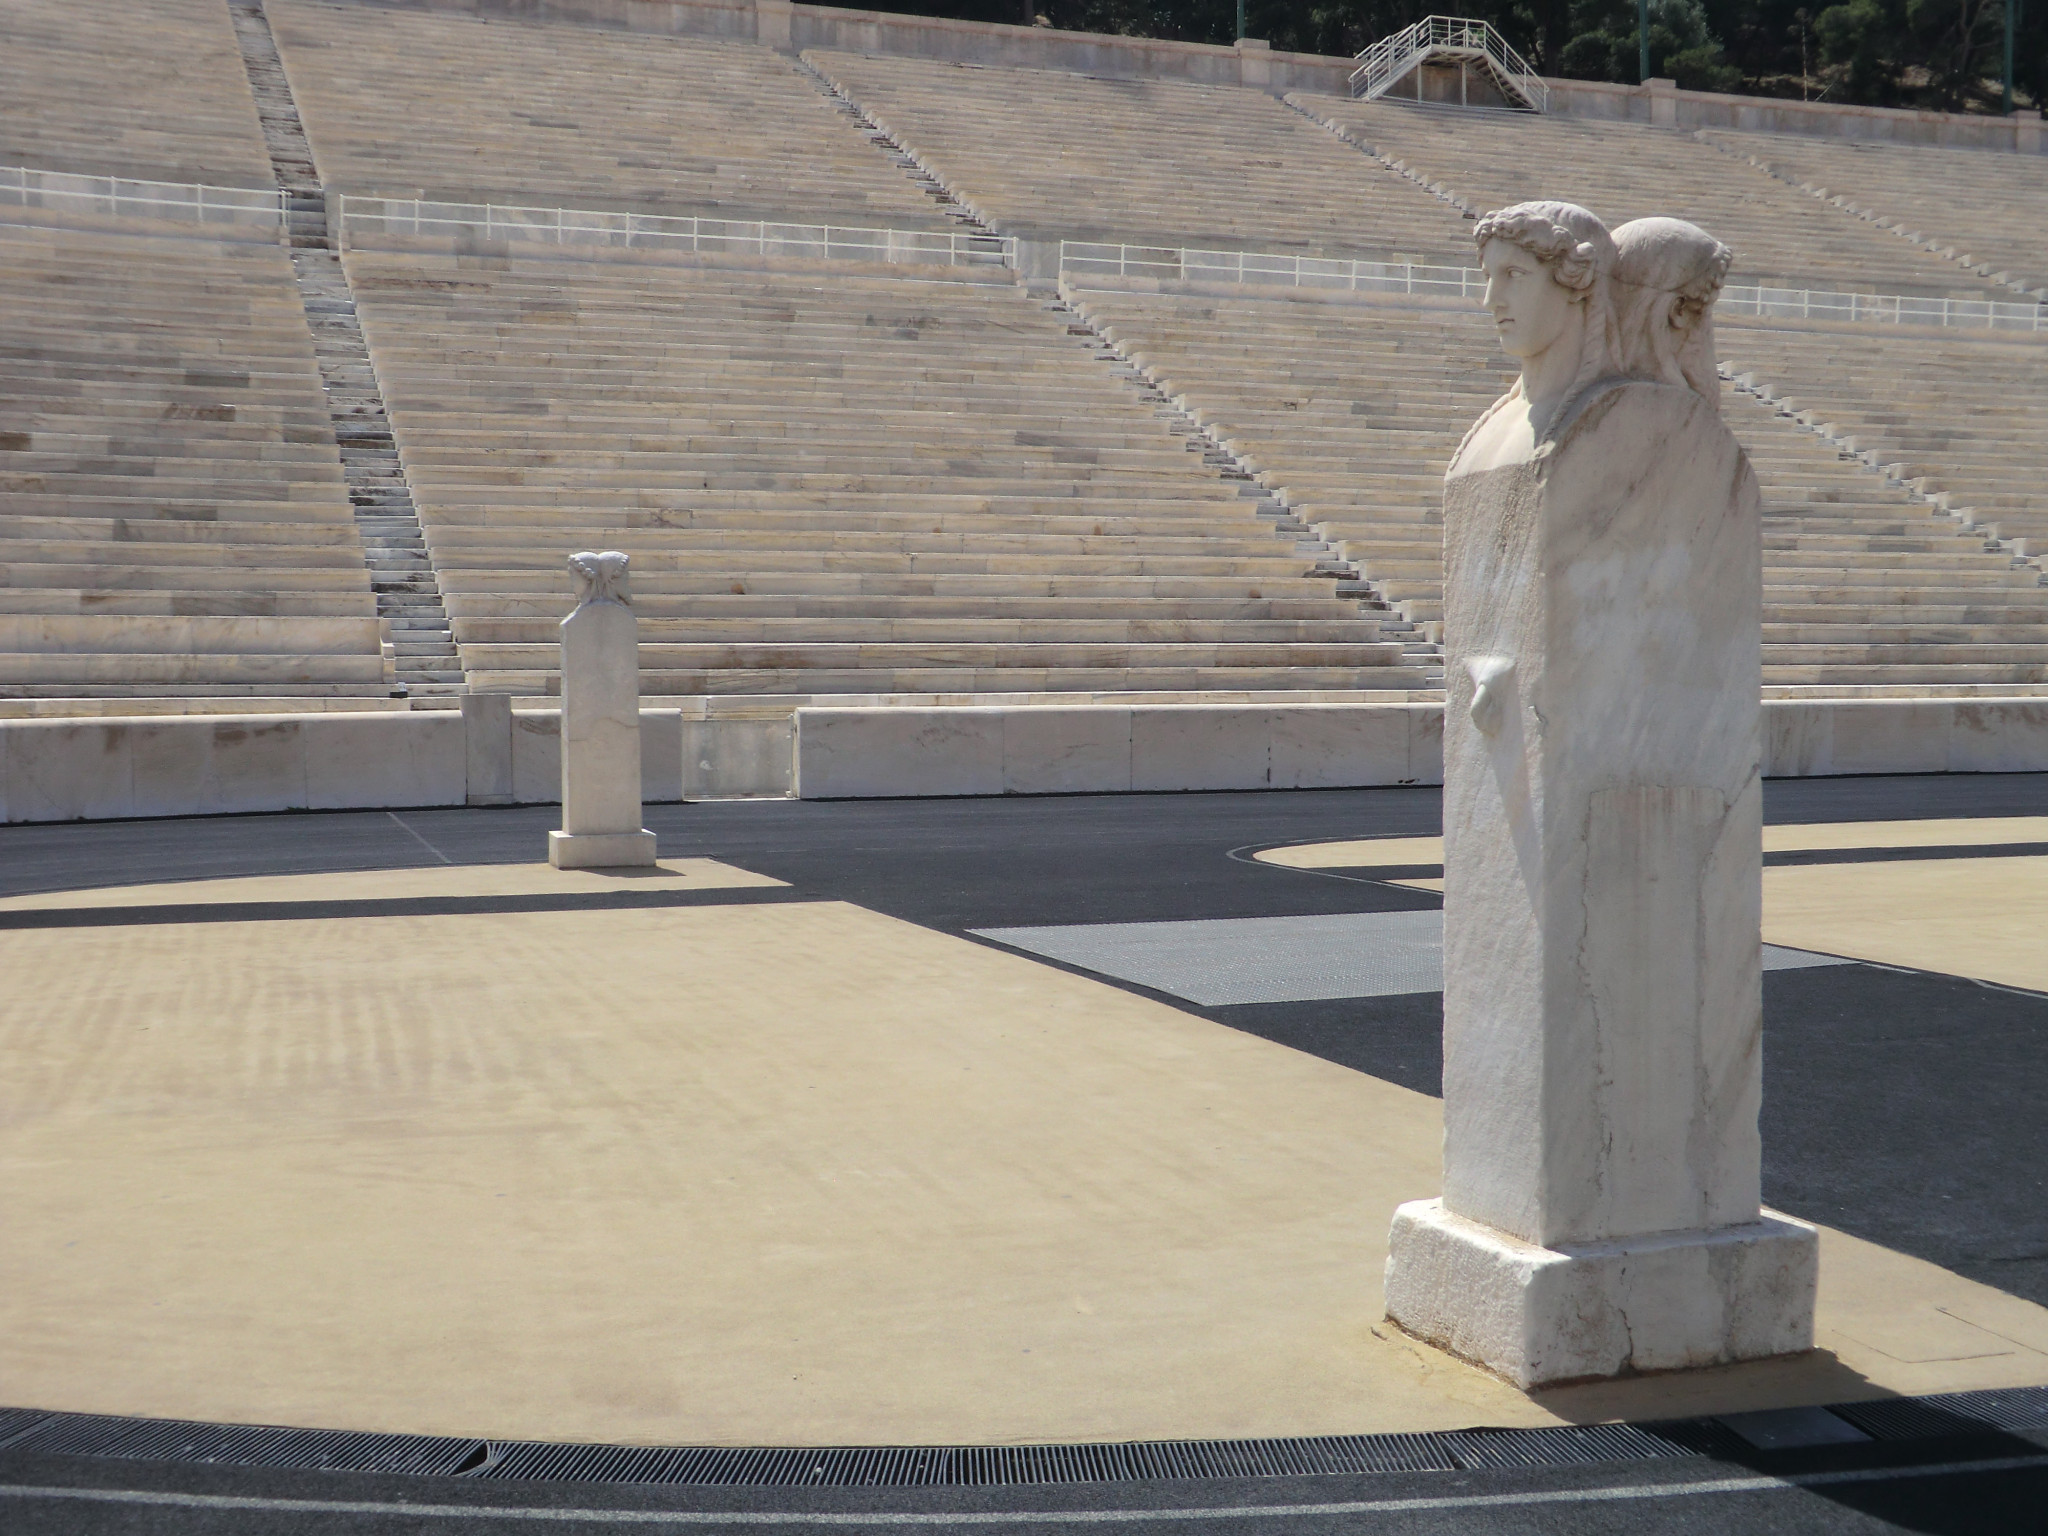 The restoration of the Panathinaiko Stadium for the first modern Olympic Games in 1896 helped gain support for the event in Greece after many had been opposed to the plan ©ITG